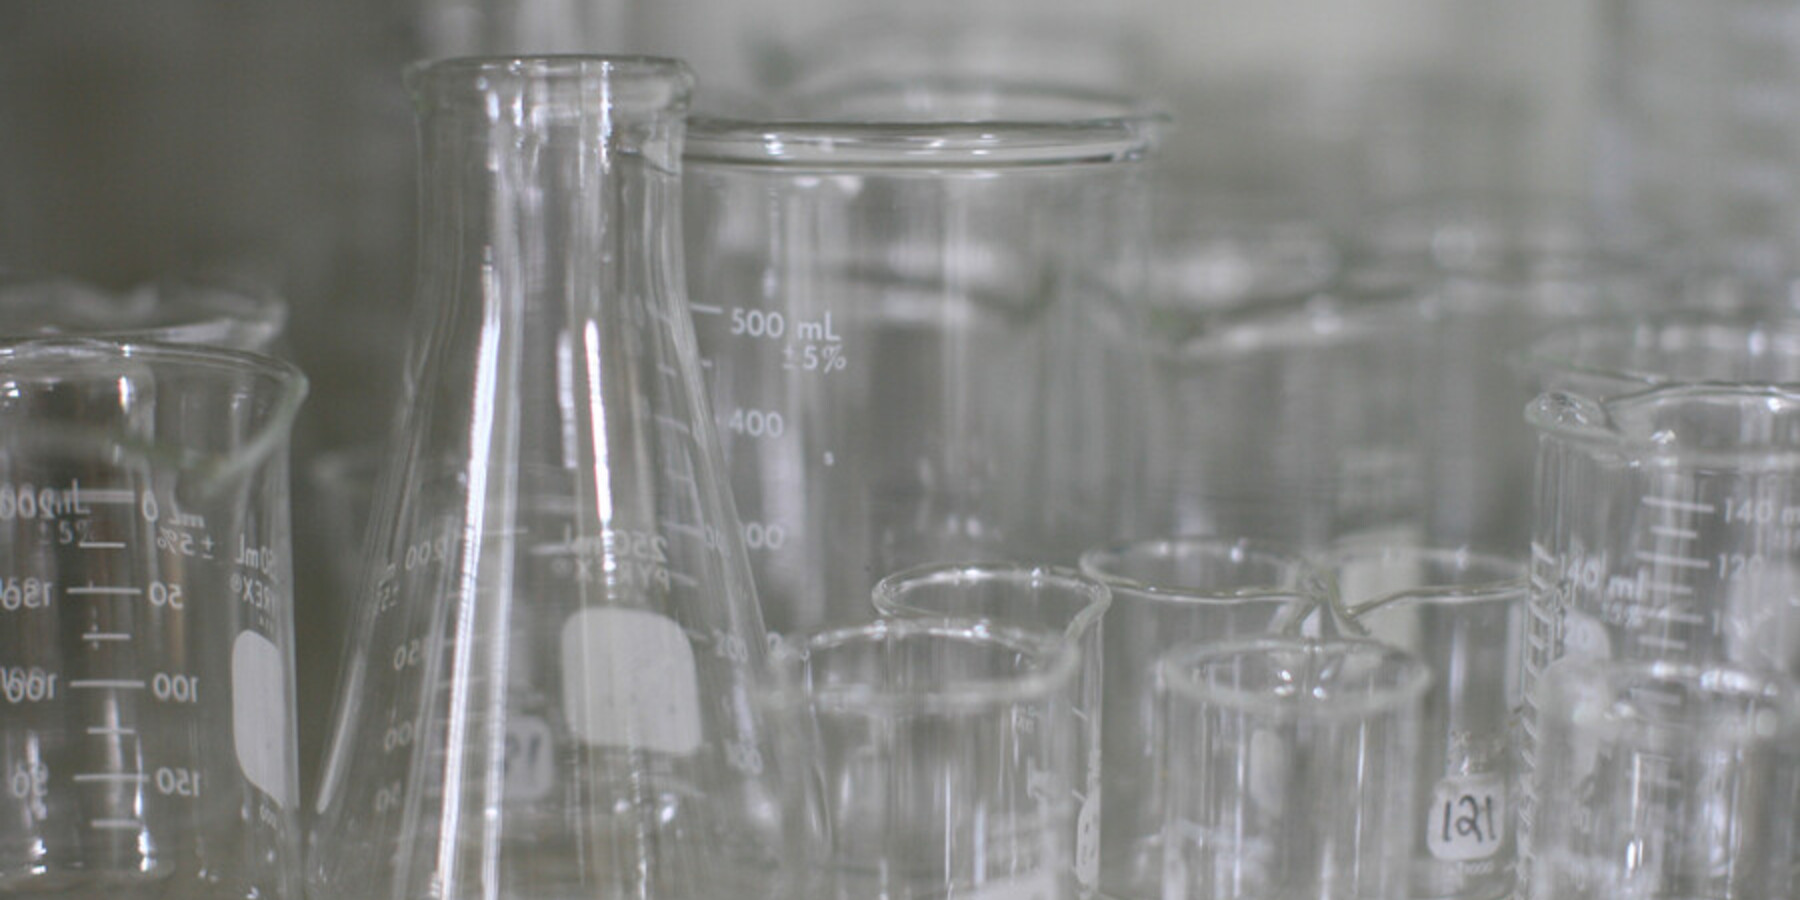 Empty flasks and beakers